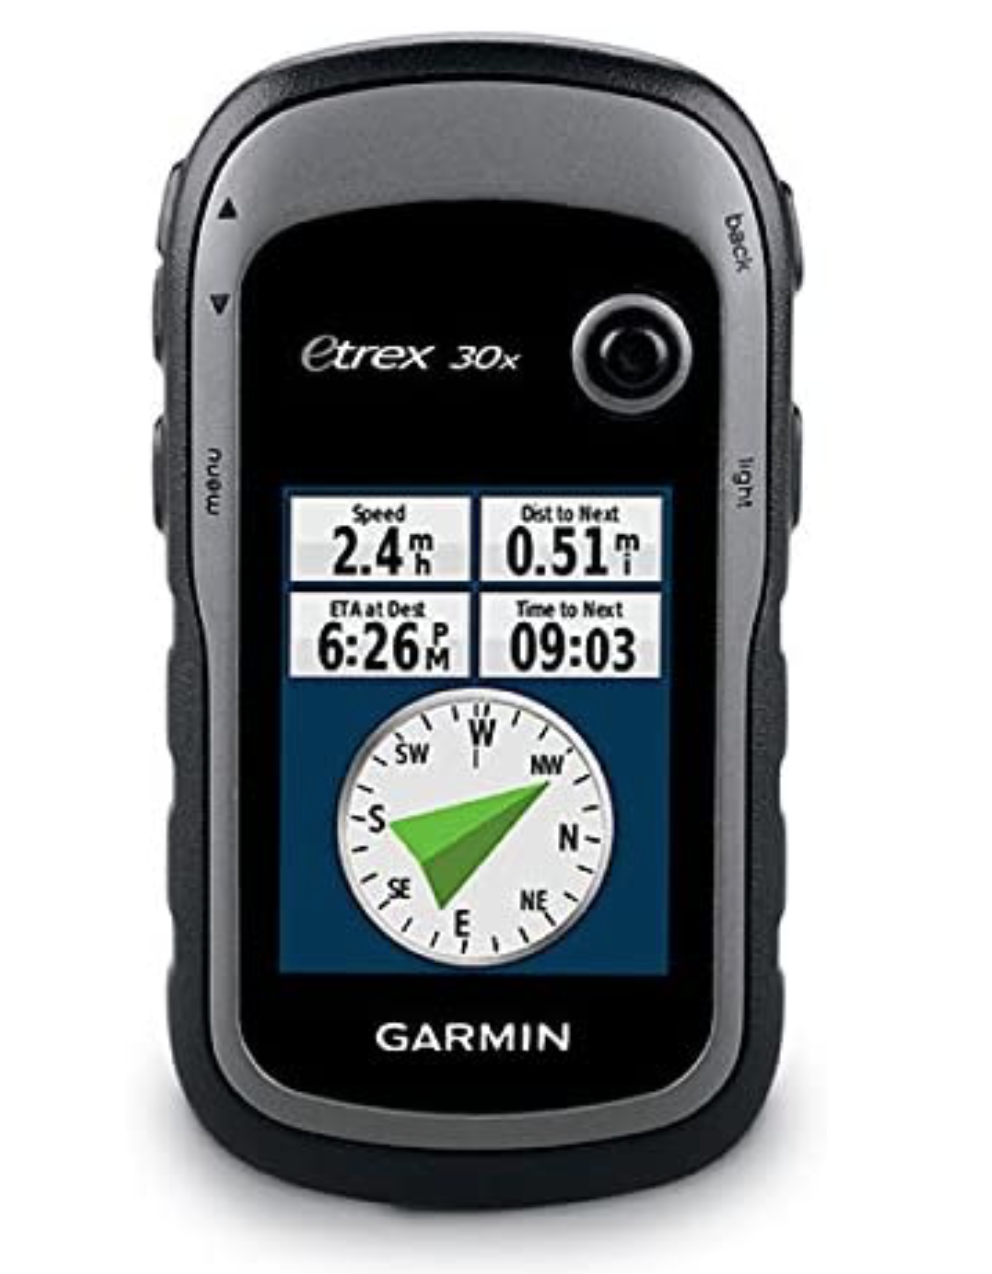 Garmin eTrex 30x, Handheld GPS Navigator with 3-axis Compass, Enhanced Memory and Resolution, 2.2-inch Color Display, Water Resistant 